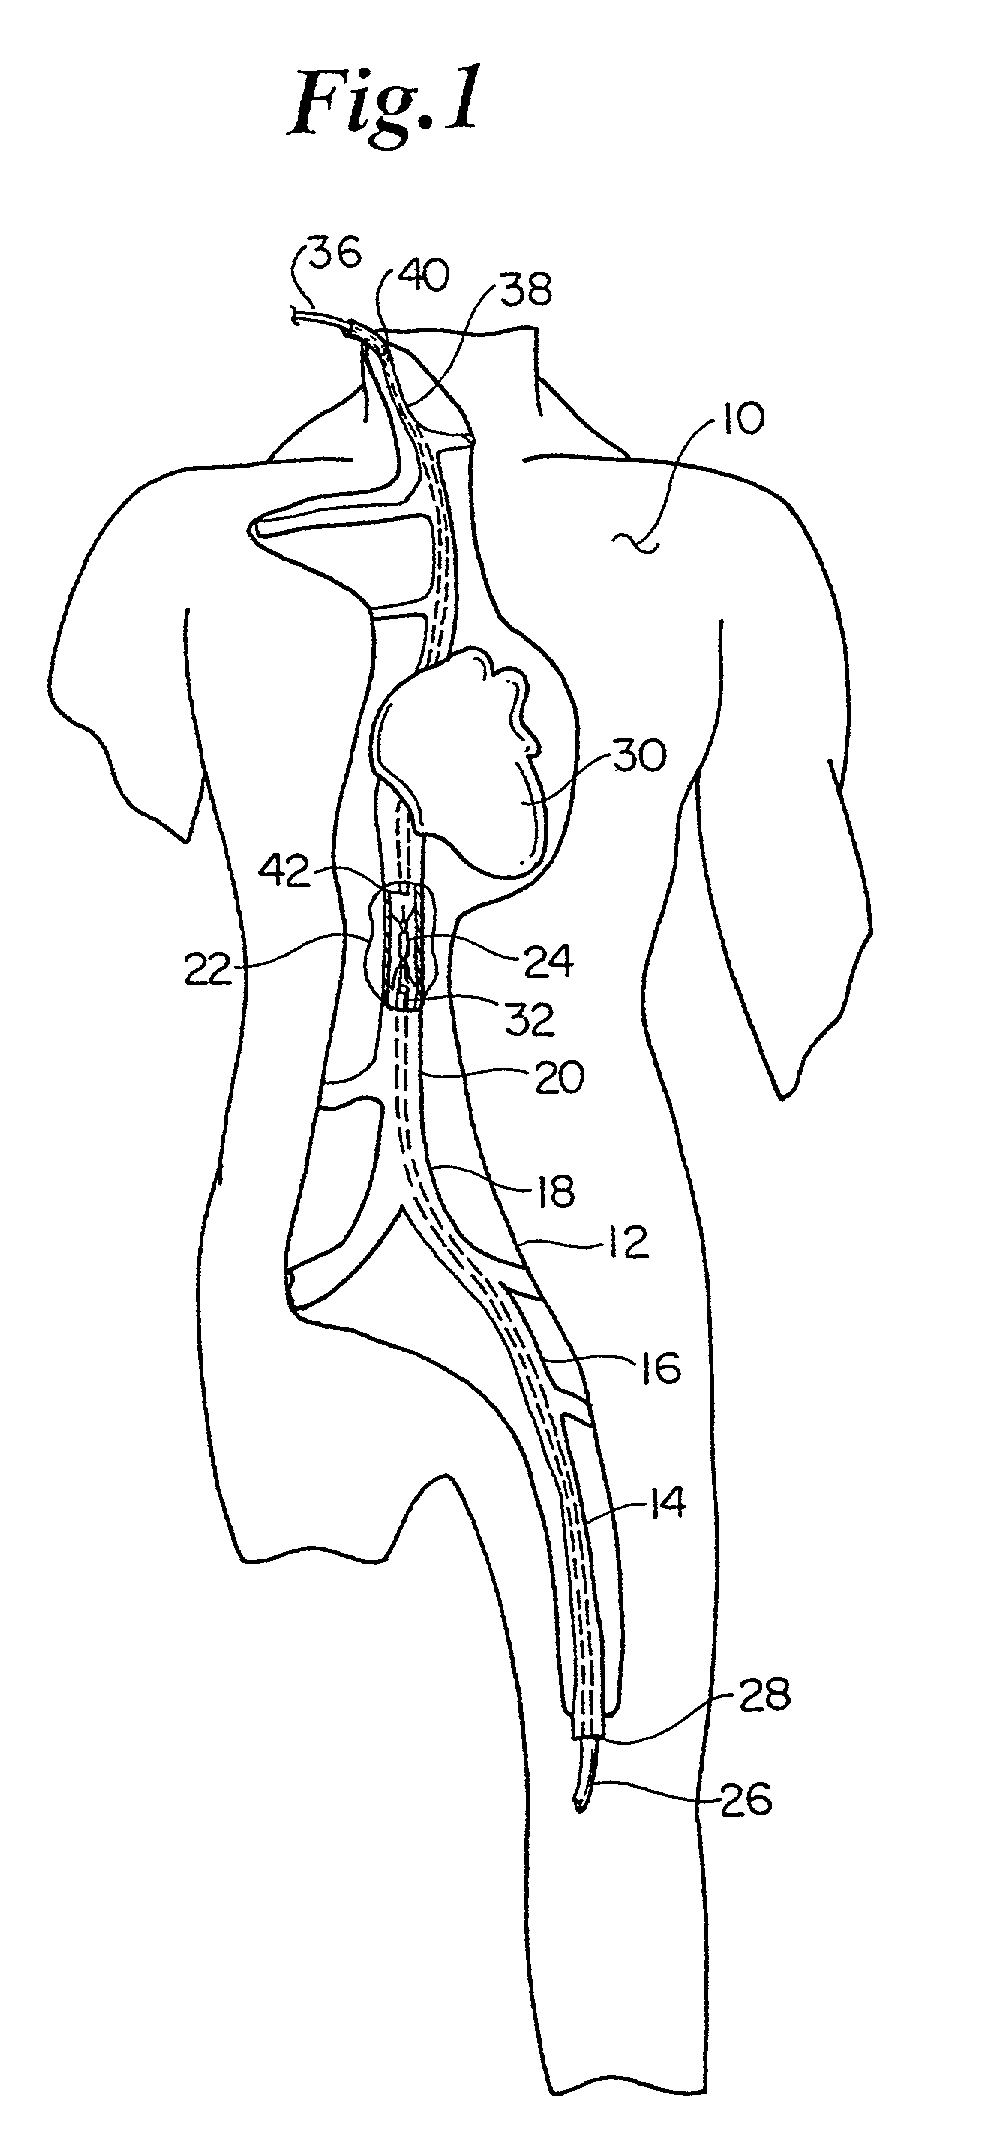 Atraumatic anchoring and disengagement mechanism for permanent implant device